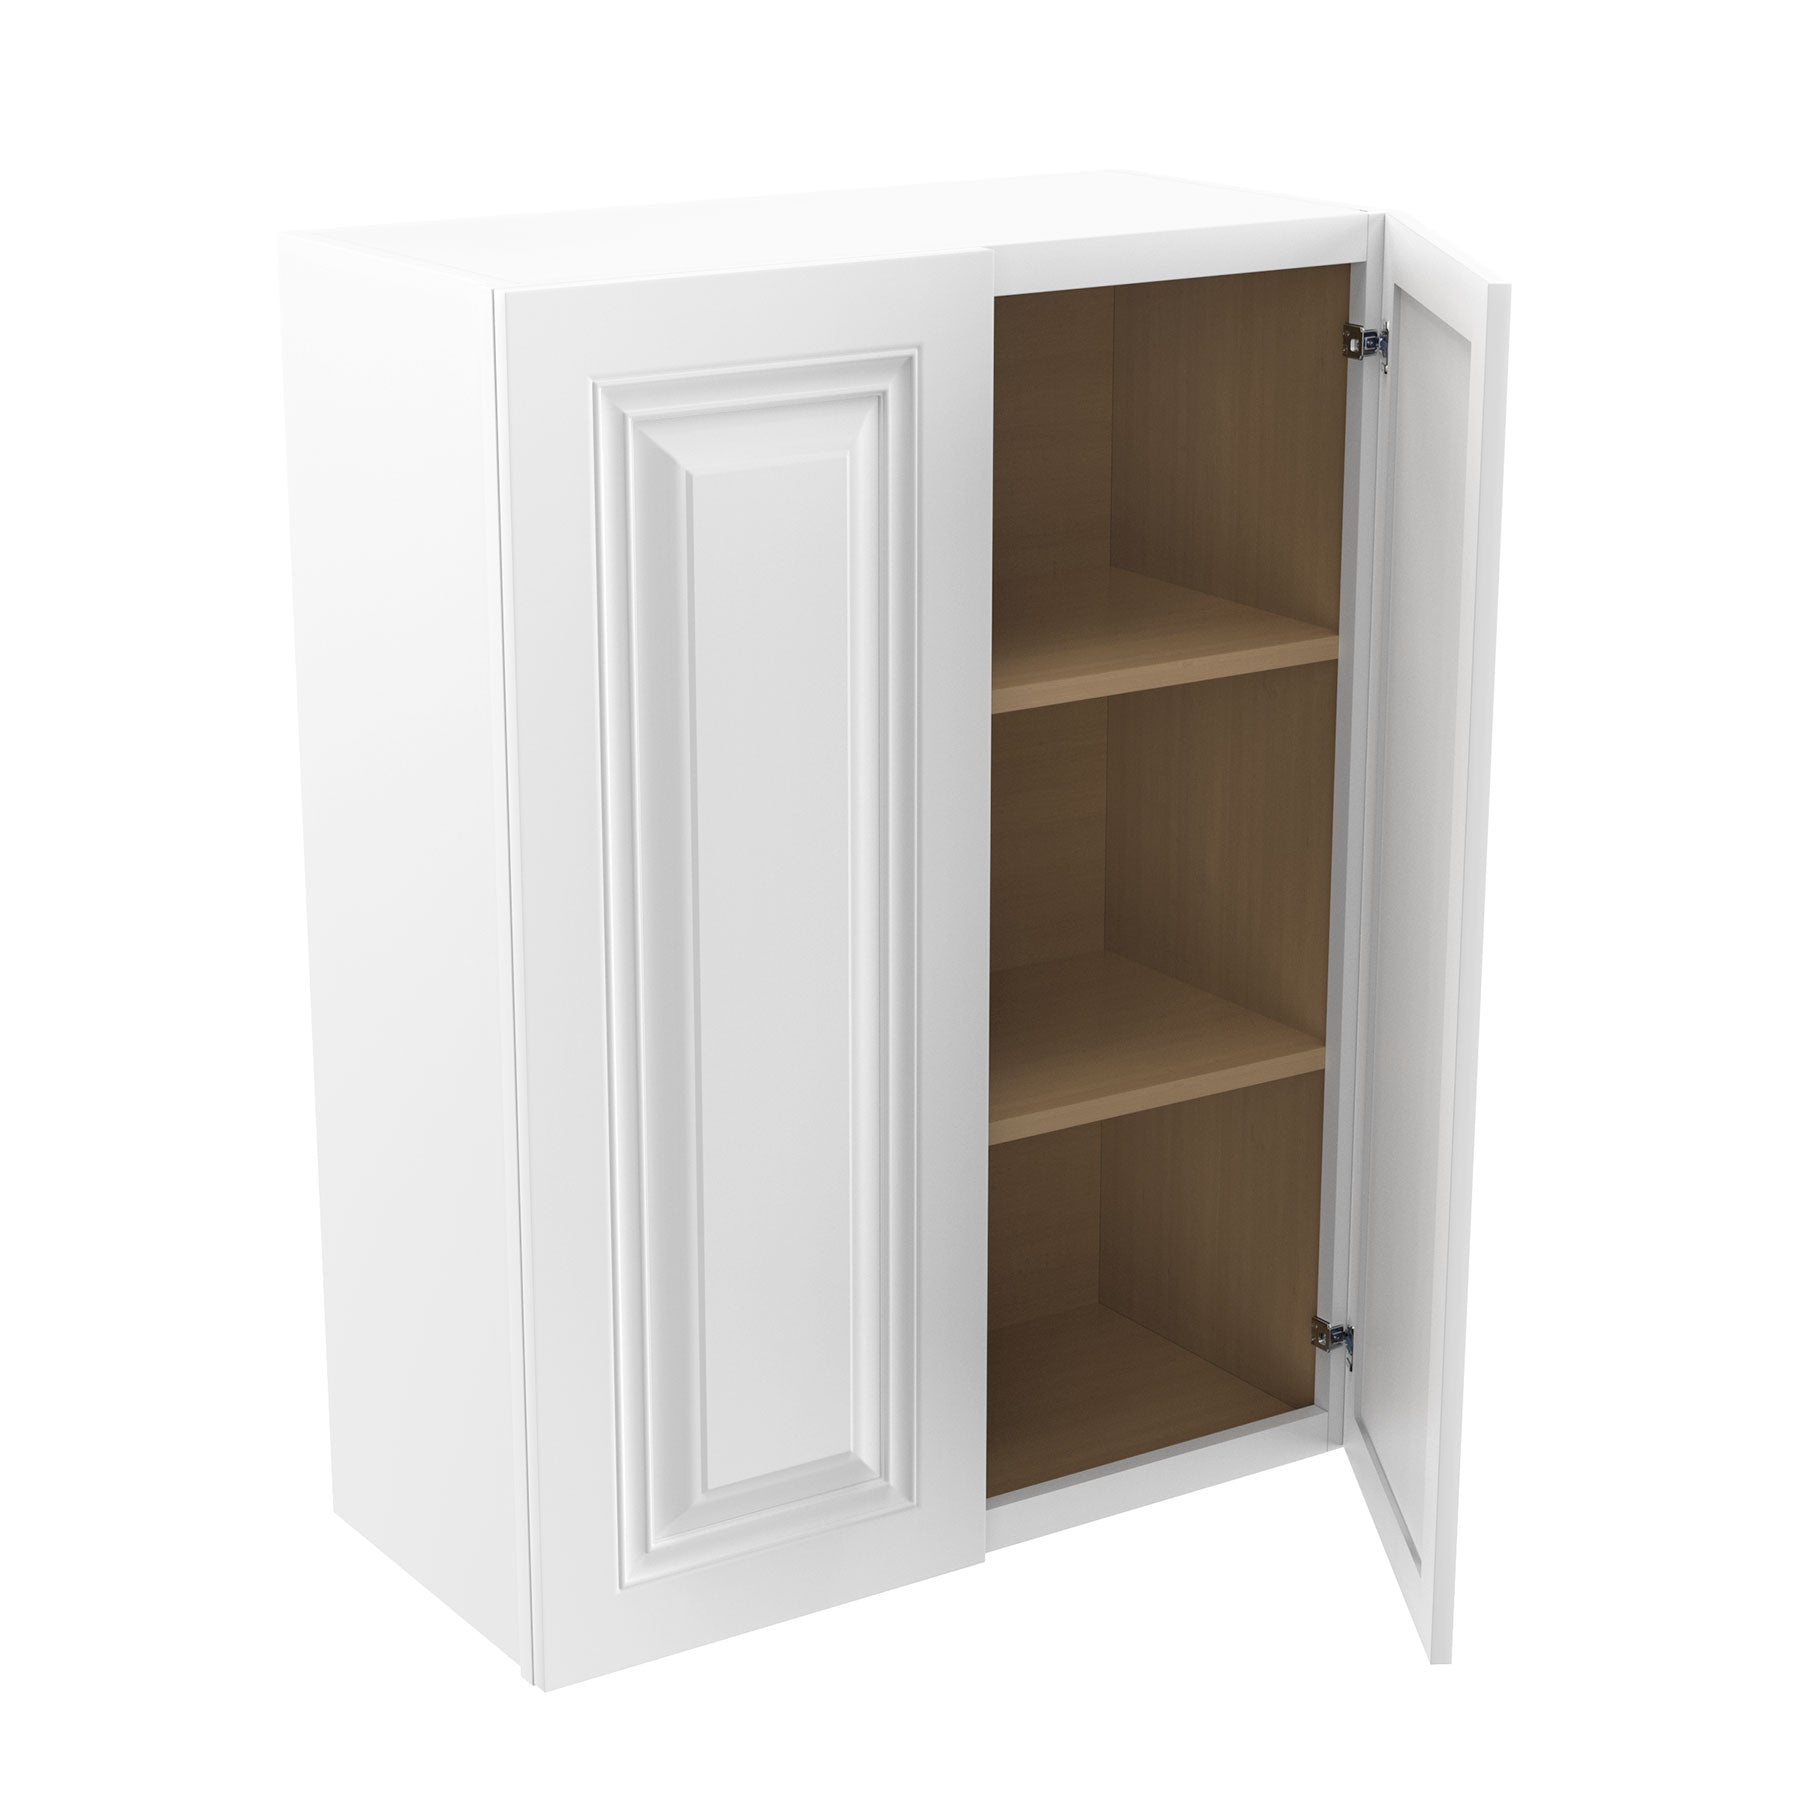 RTA - Park Avenue White - 36" High Double Door Wall Cabinet | 27"W x 36"H x 12"D